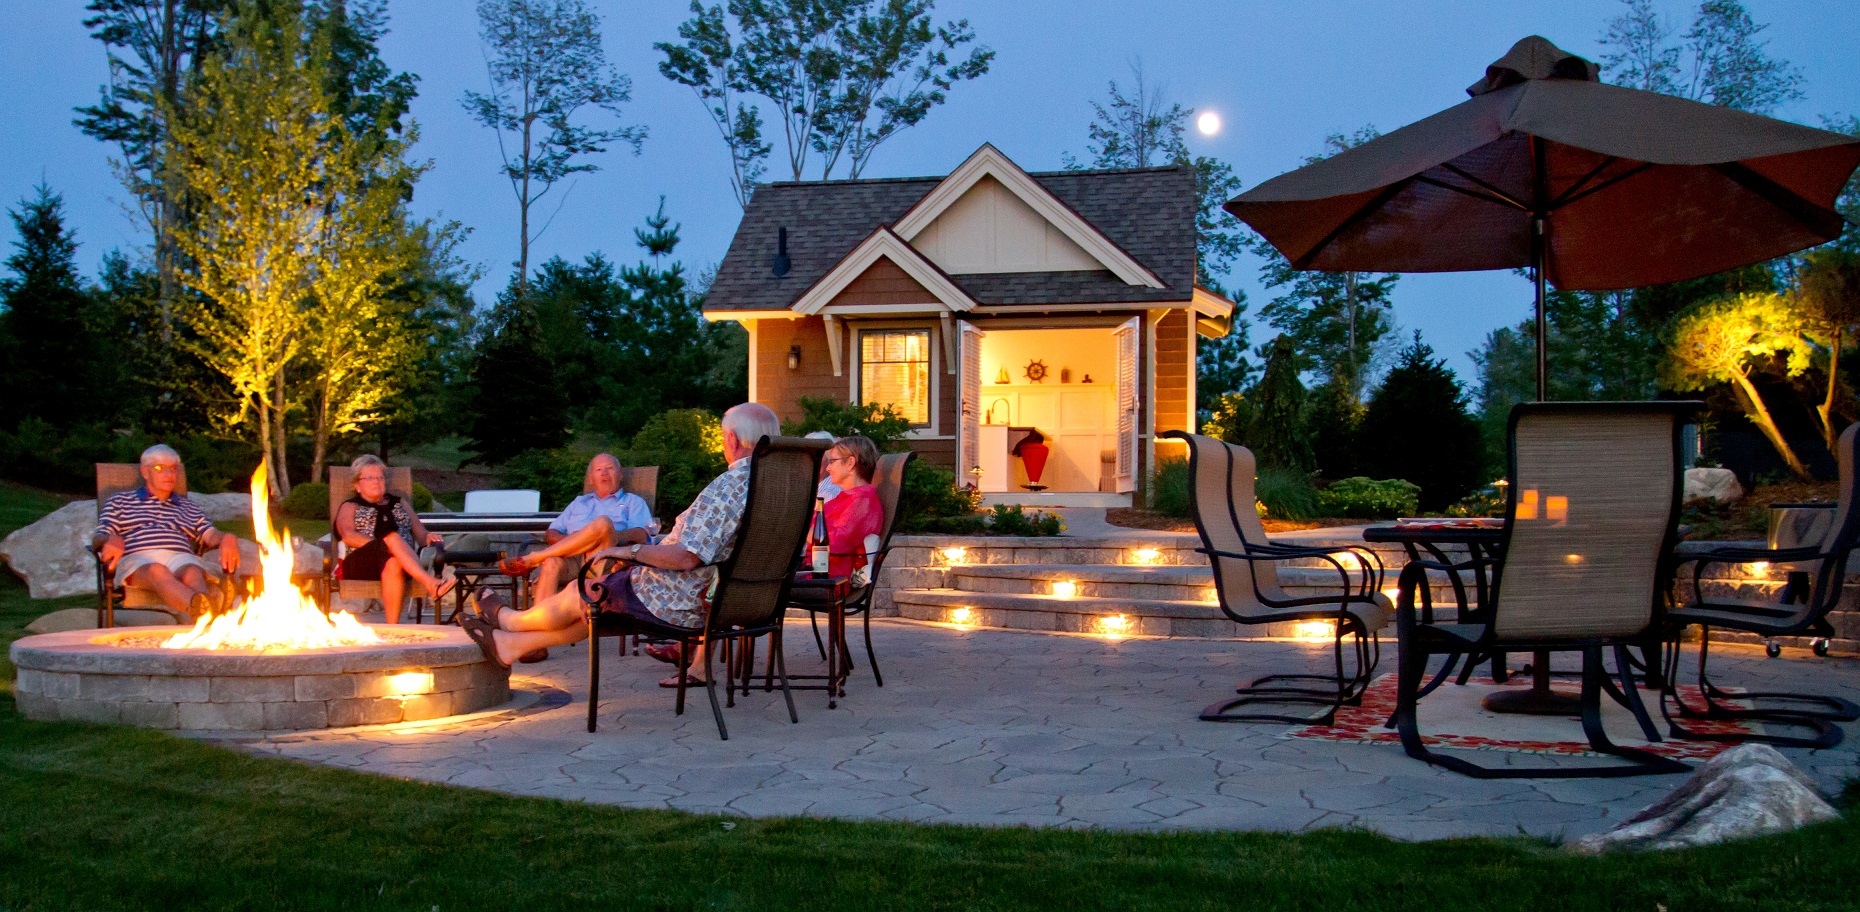 Landscape lighting and brick pavers in Orchard Lake, MI